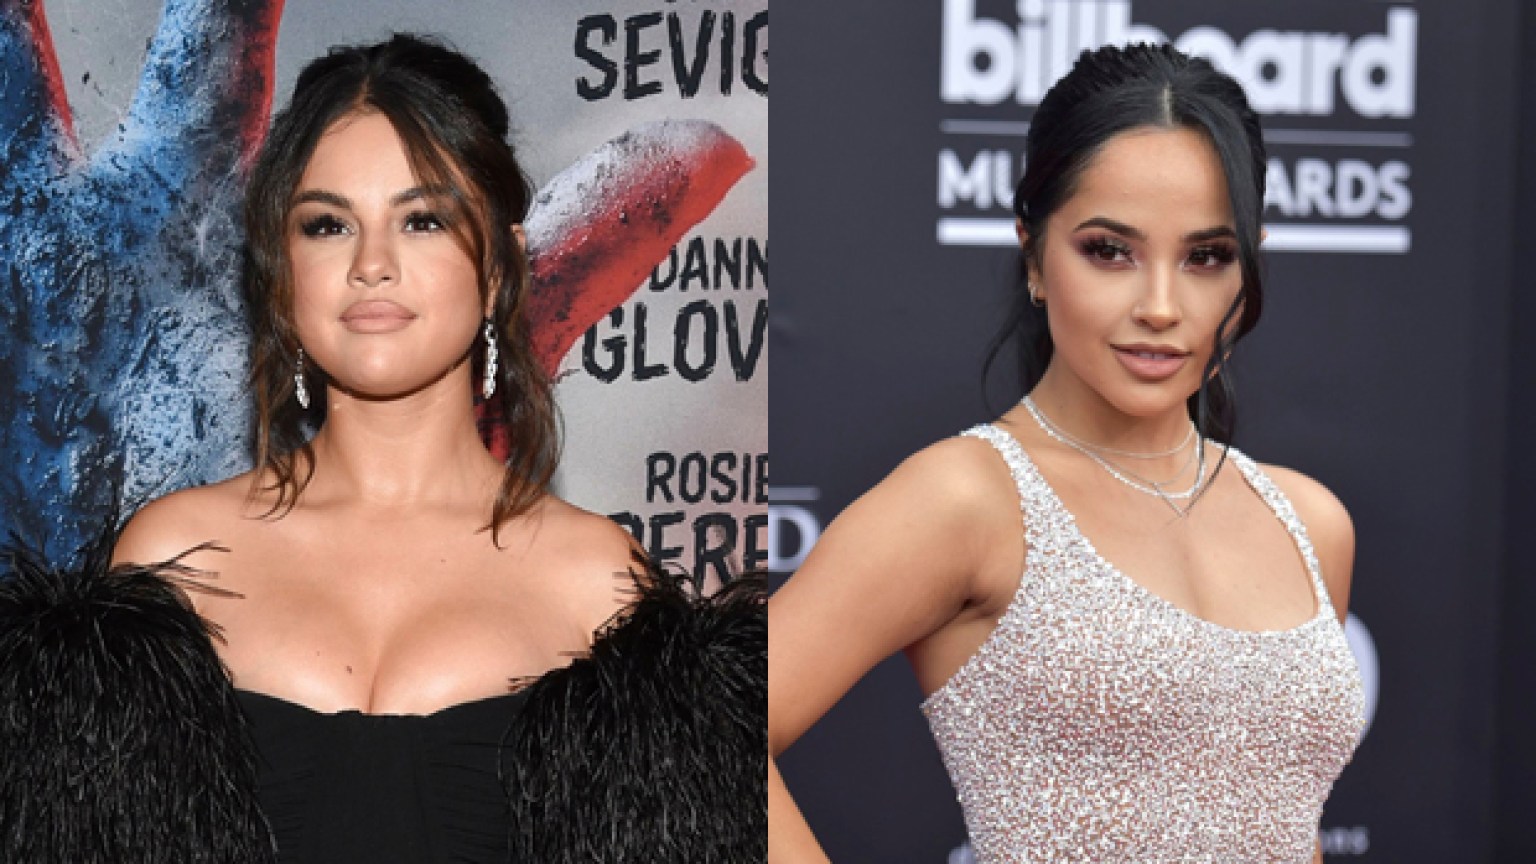 Selena Gomezs Reaction To Fans Accusing Becky G Of Throwing Shade At Her Hollywood Life 9641